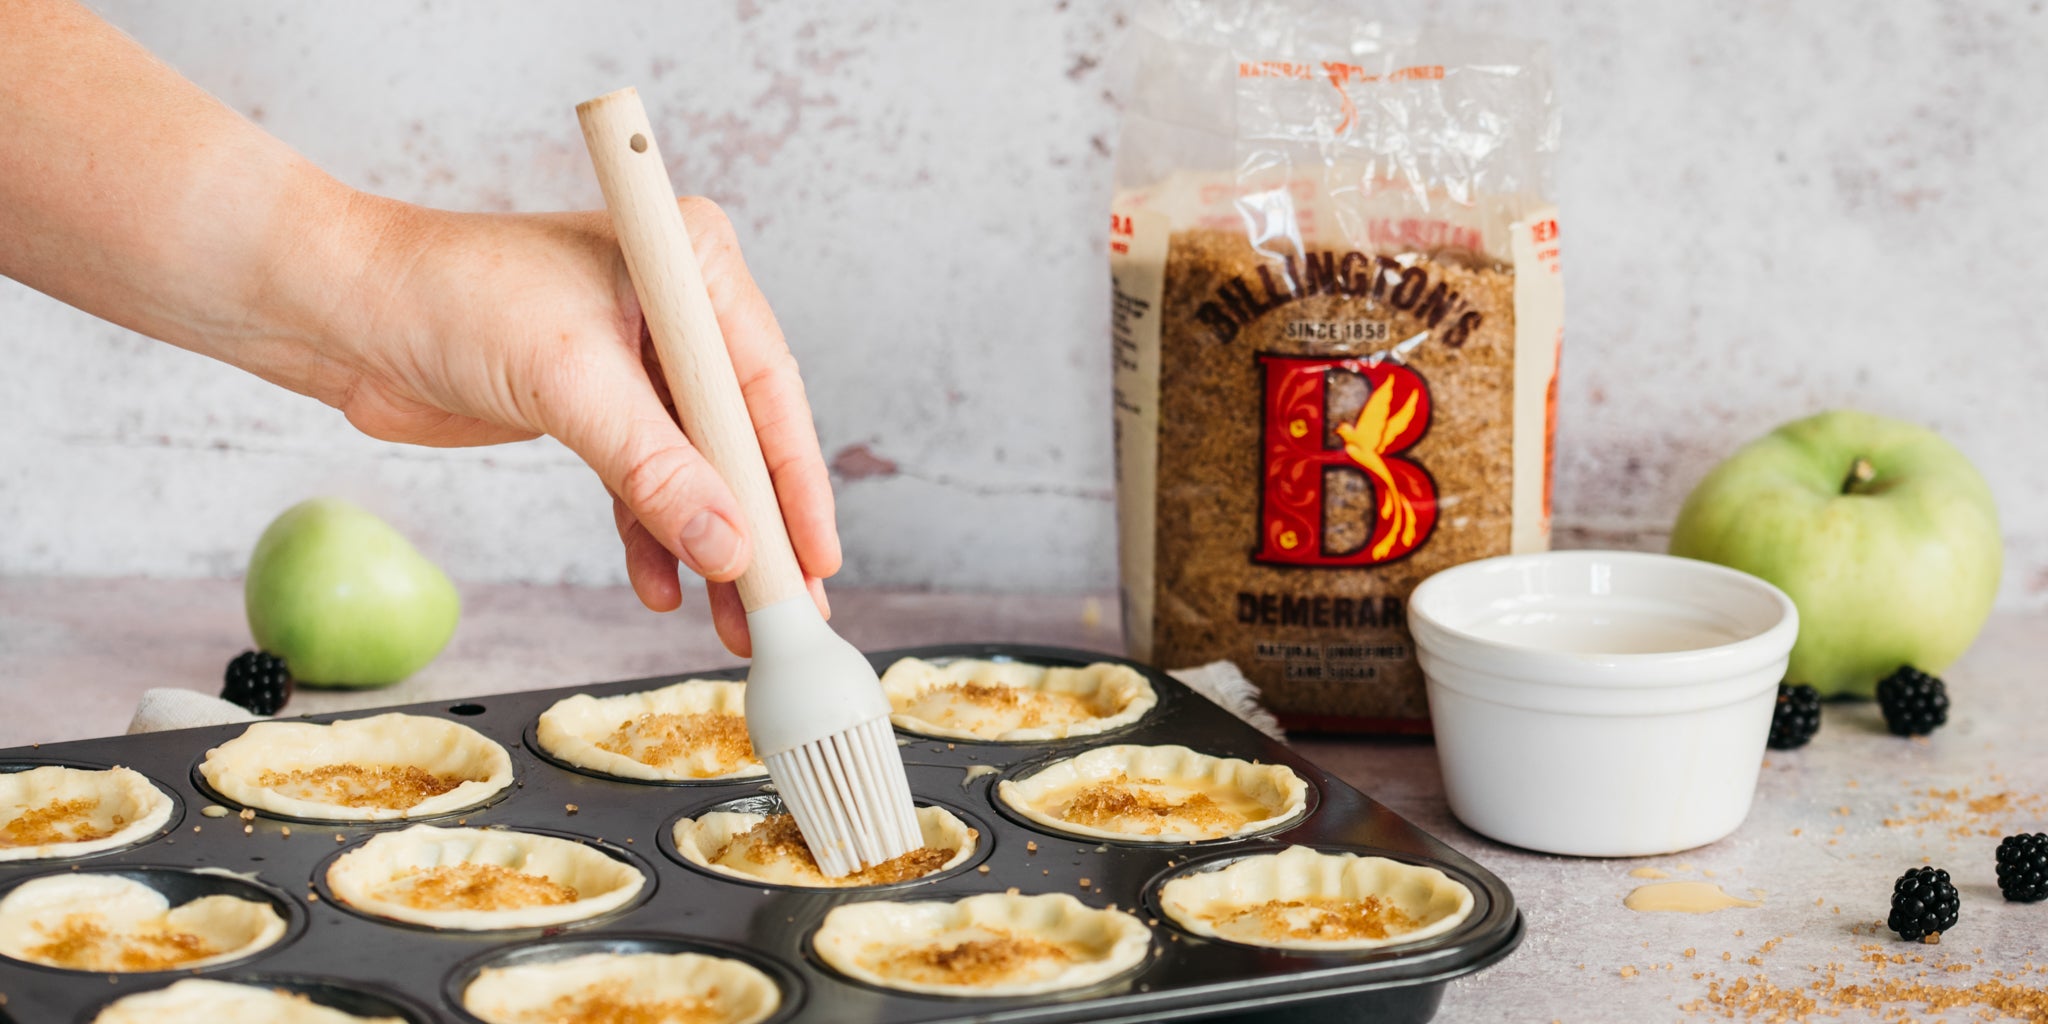 Hand brush the top of pies in baking tray